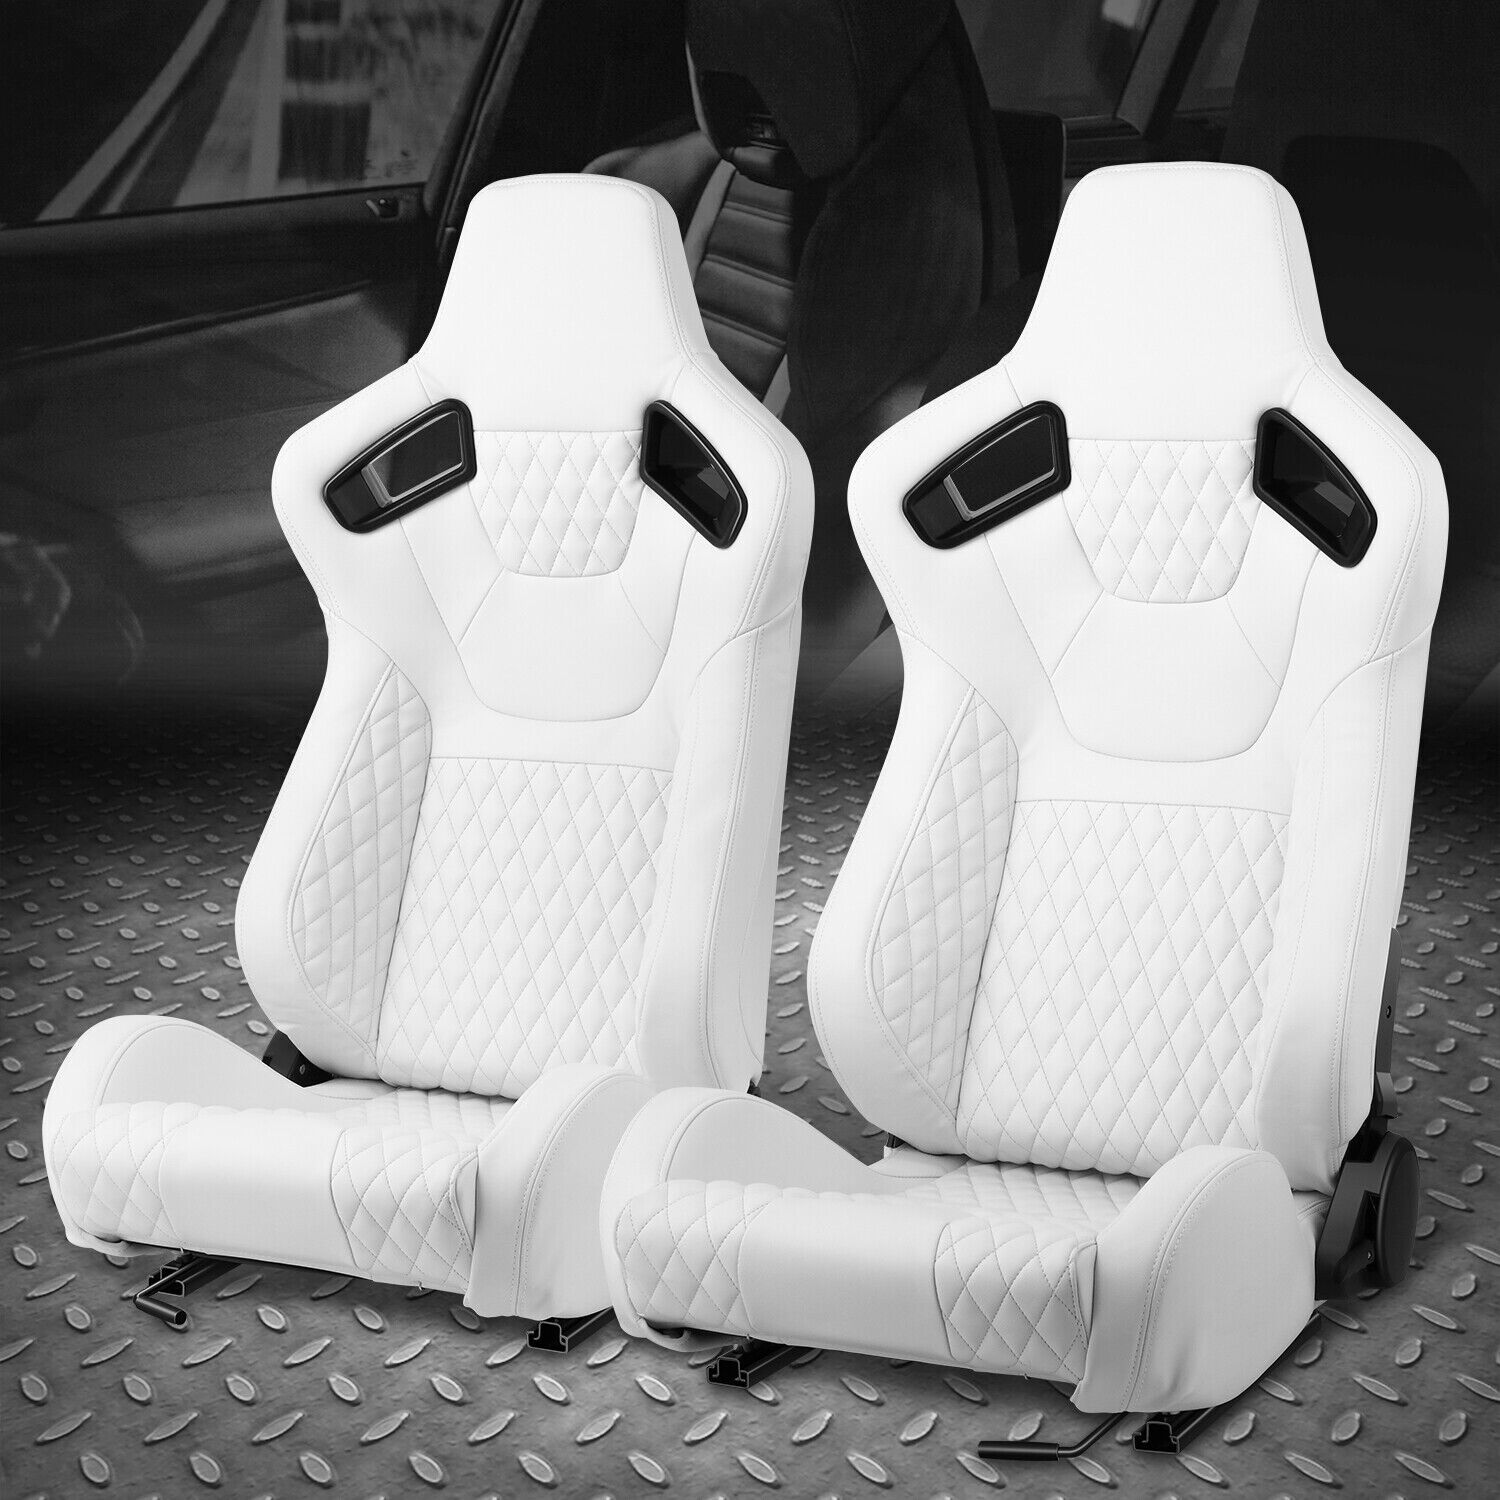 Pair of Universal White Vinyl & Stitching Adjustable Reclinable Racing Seats